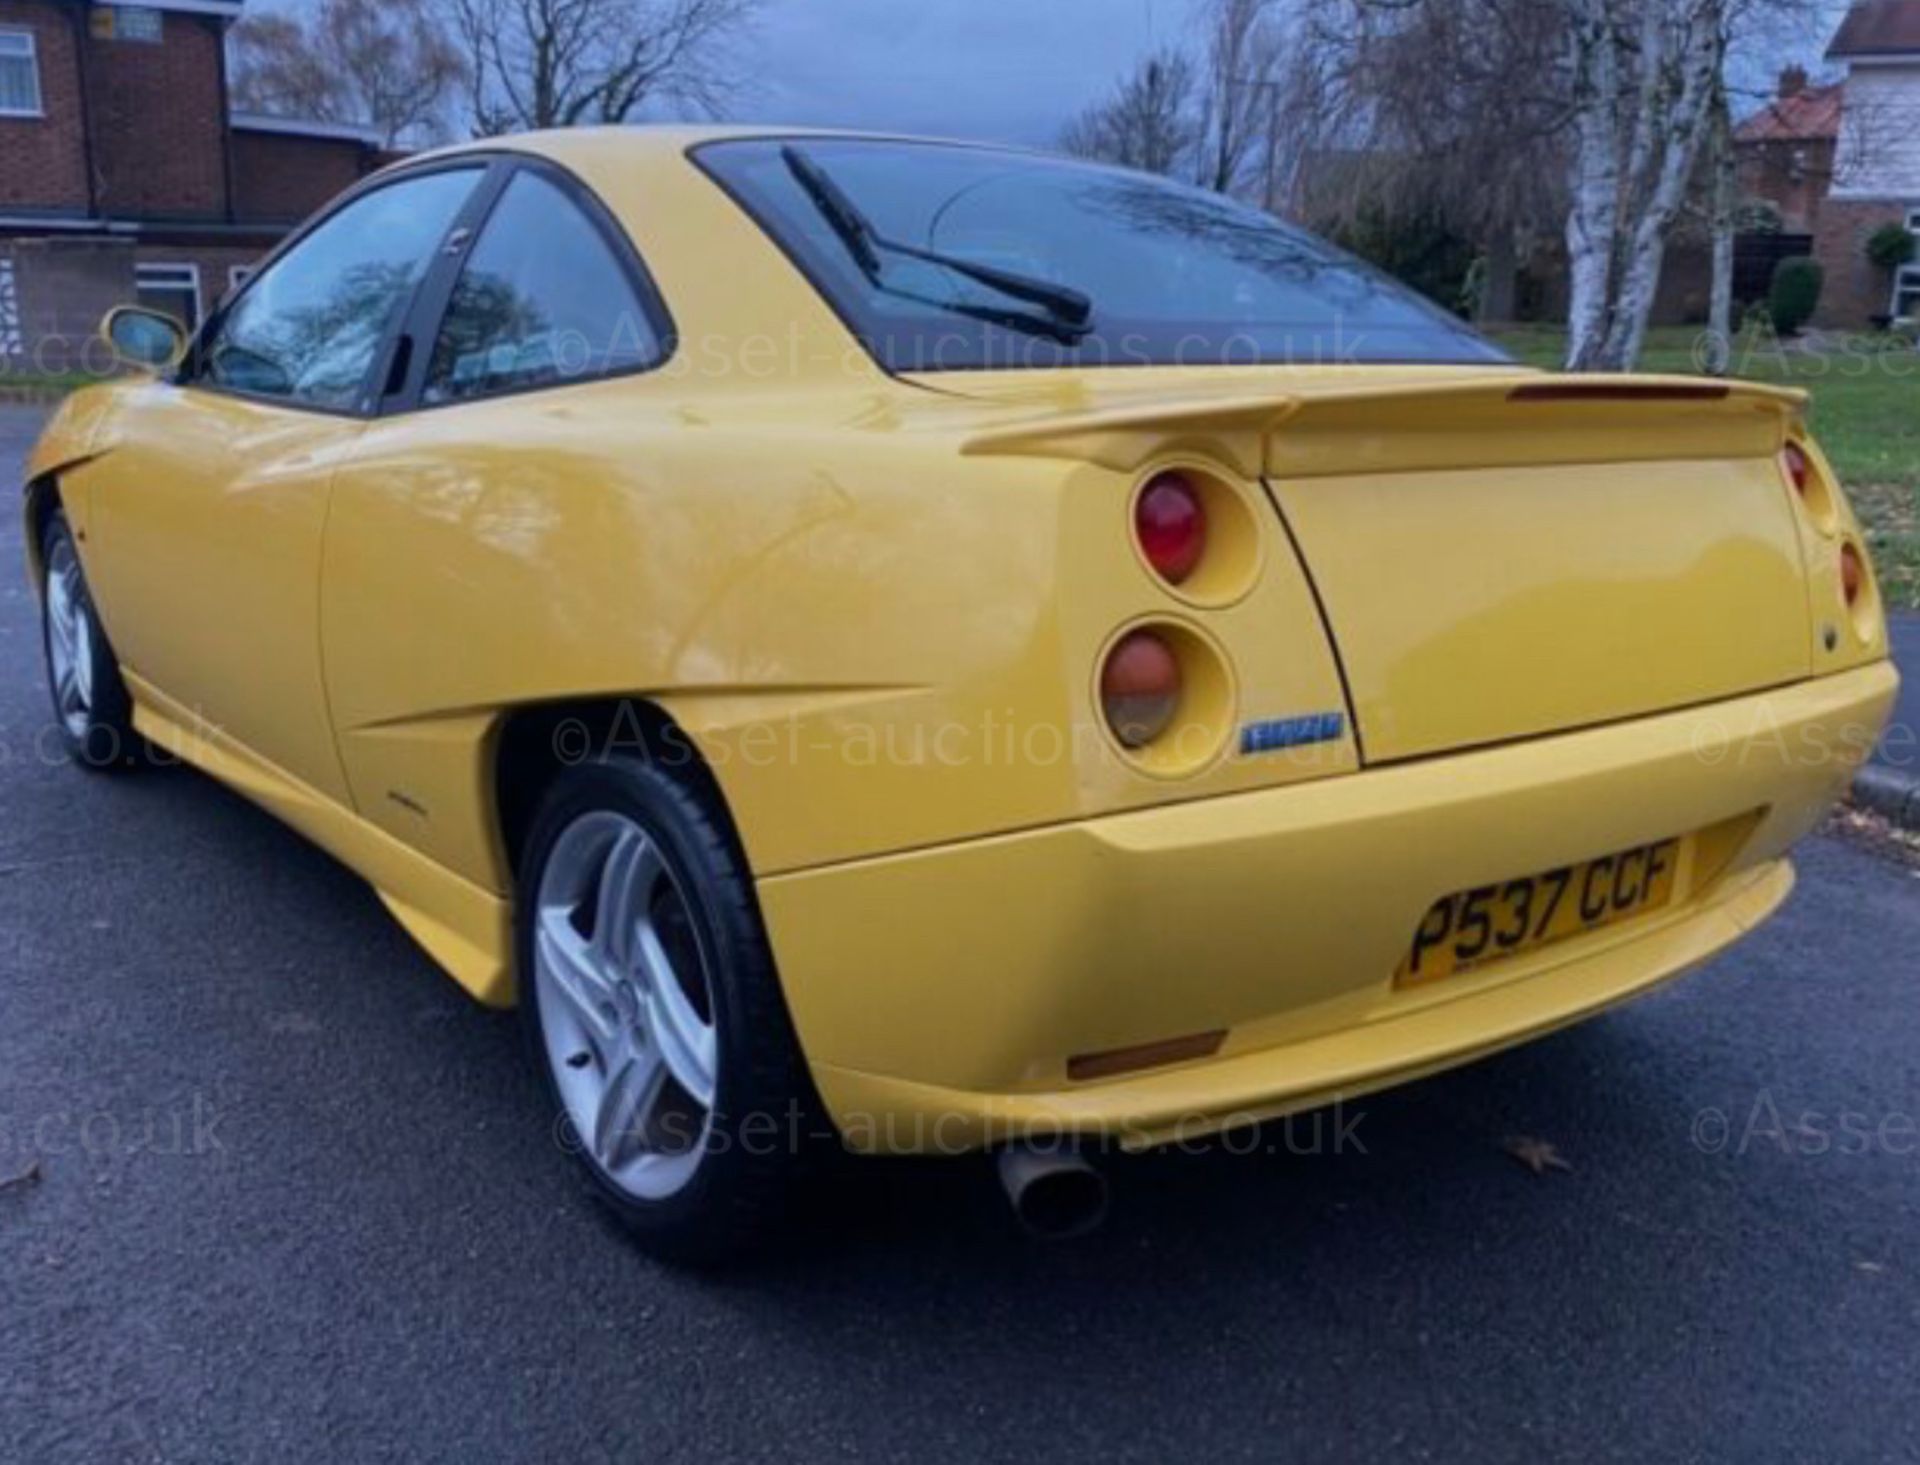 1996 FIAT COUPE 20V TURBO YELLOW SALOON, 2.0 PETROL ENGINE, SHOWING 95K MILES *NO VAT* - Image 5 of 12